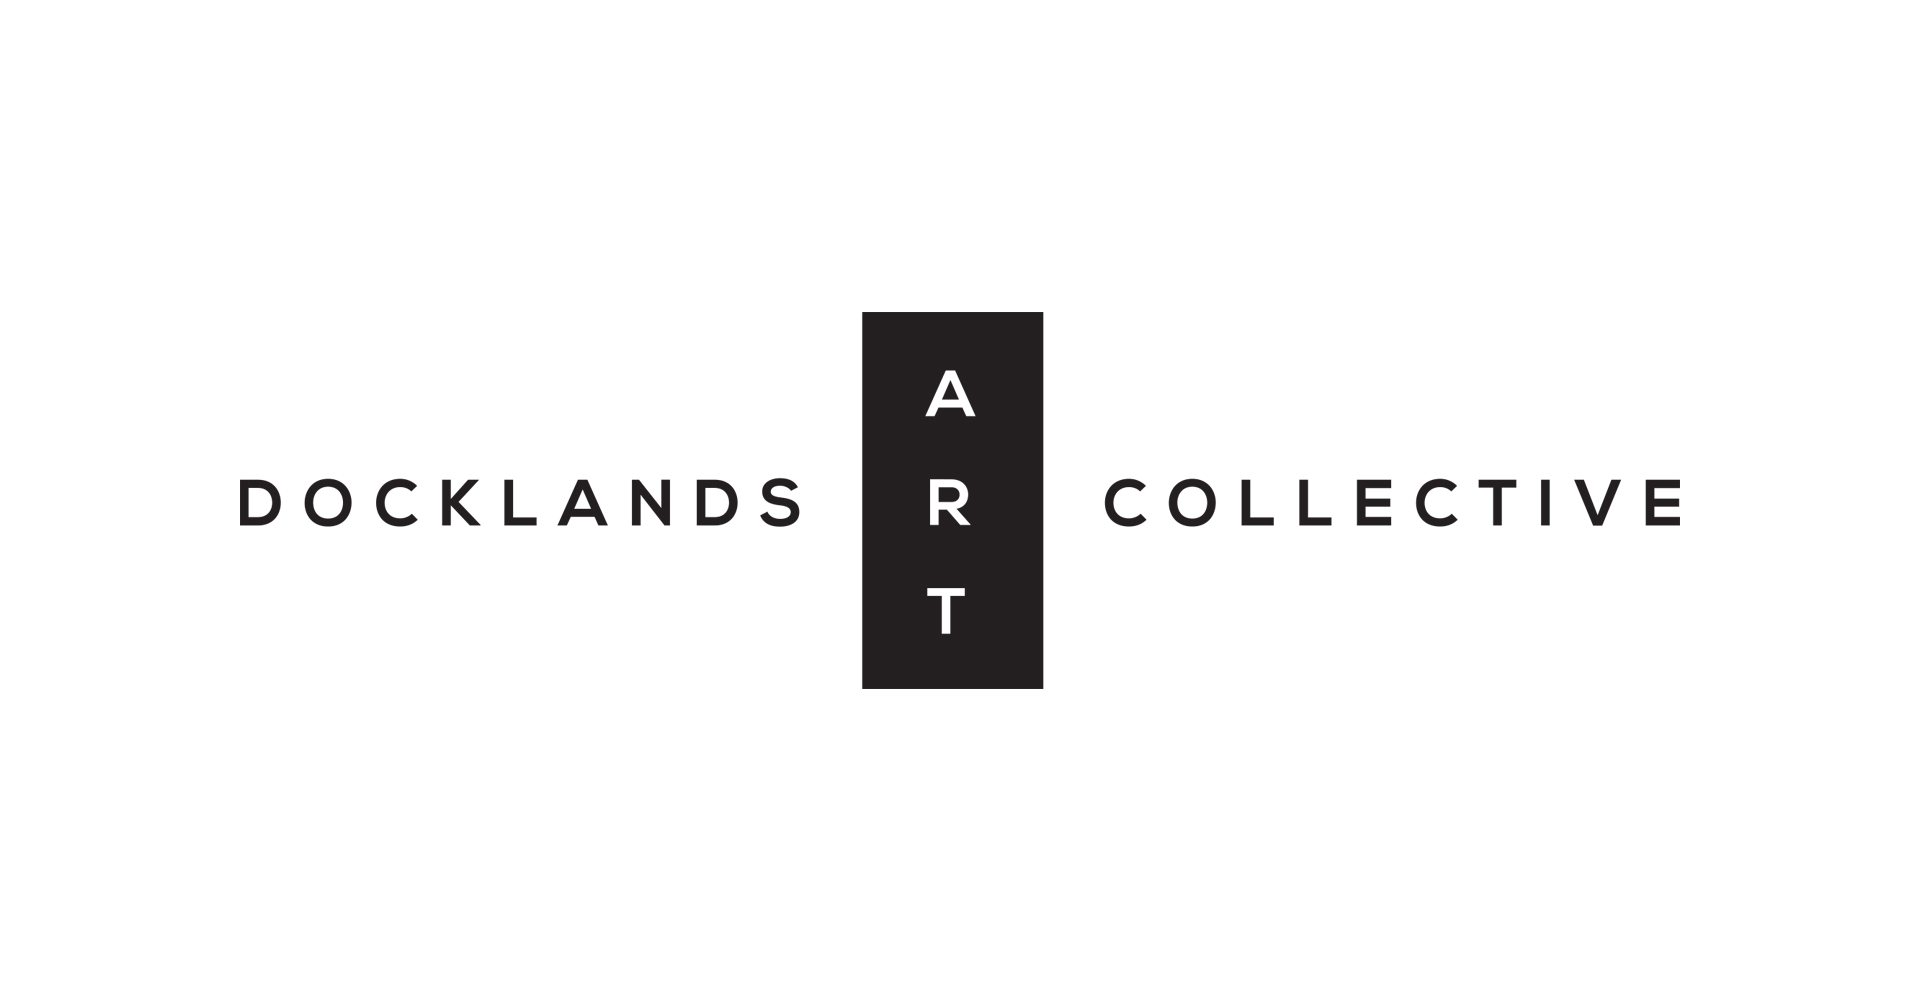 Docklands-Art-Collective-Brand-Identity-by-Studio-Mimi-Moon-2